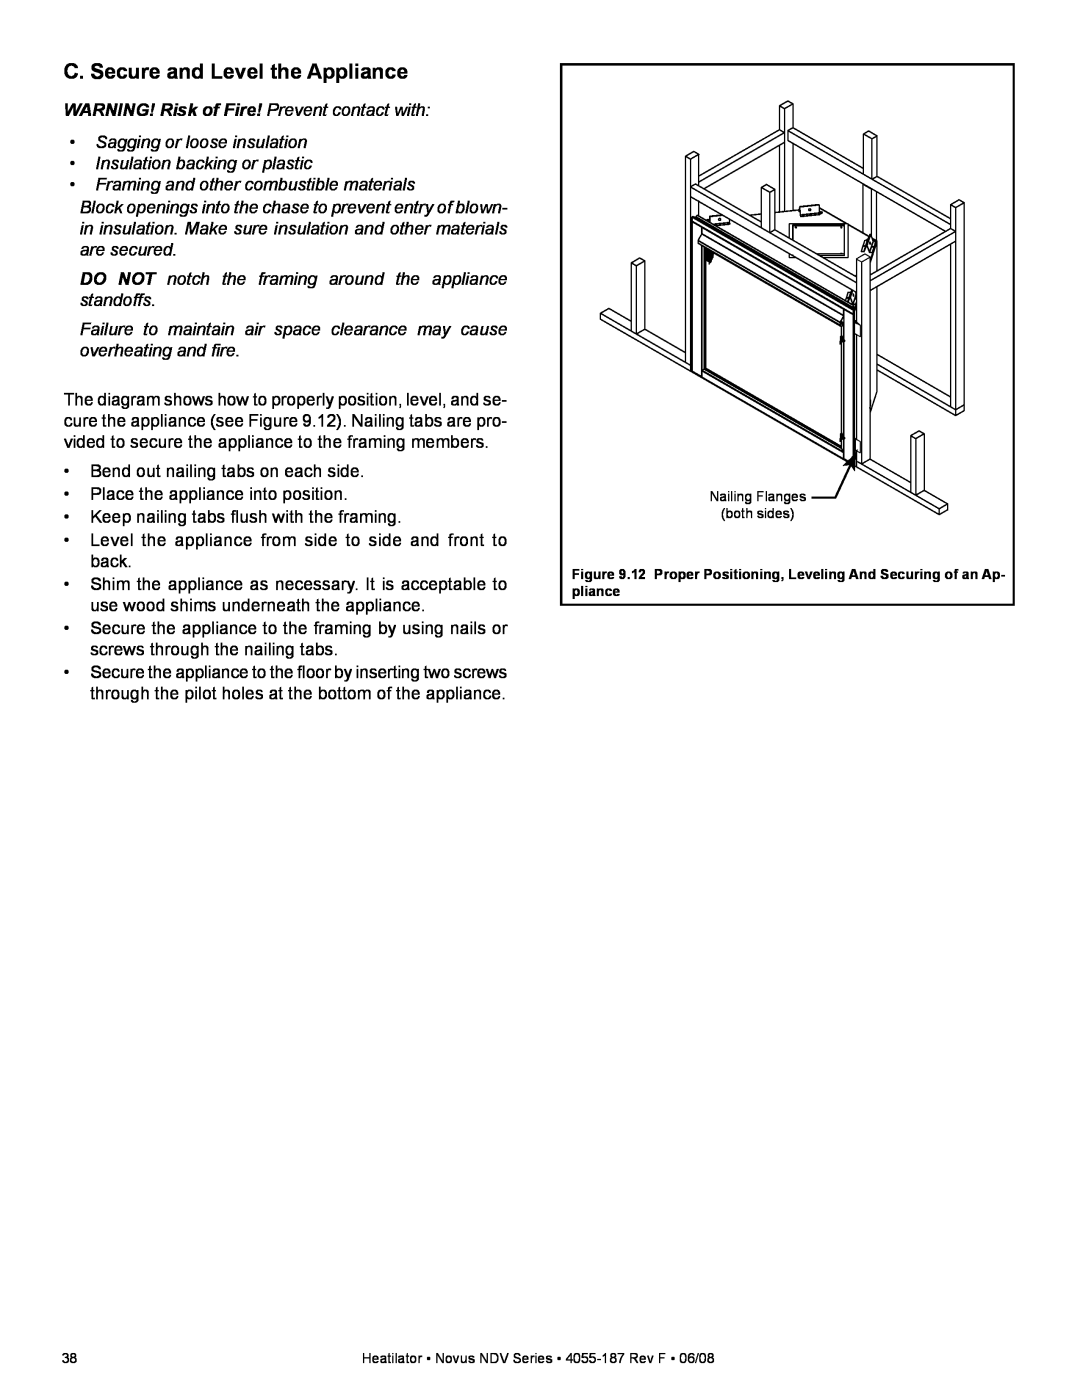 Hearth and Home Technologies NDV4842IL C. Secure and Level the Appliance, WARNING! Risk of Fire! Prevent contact with 